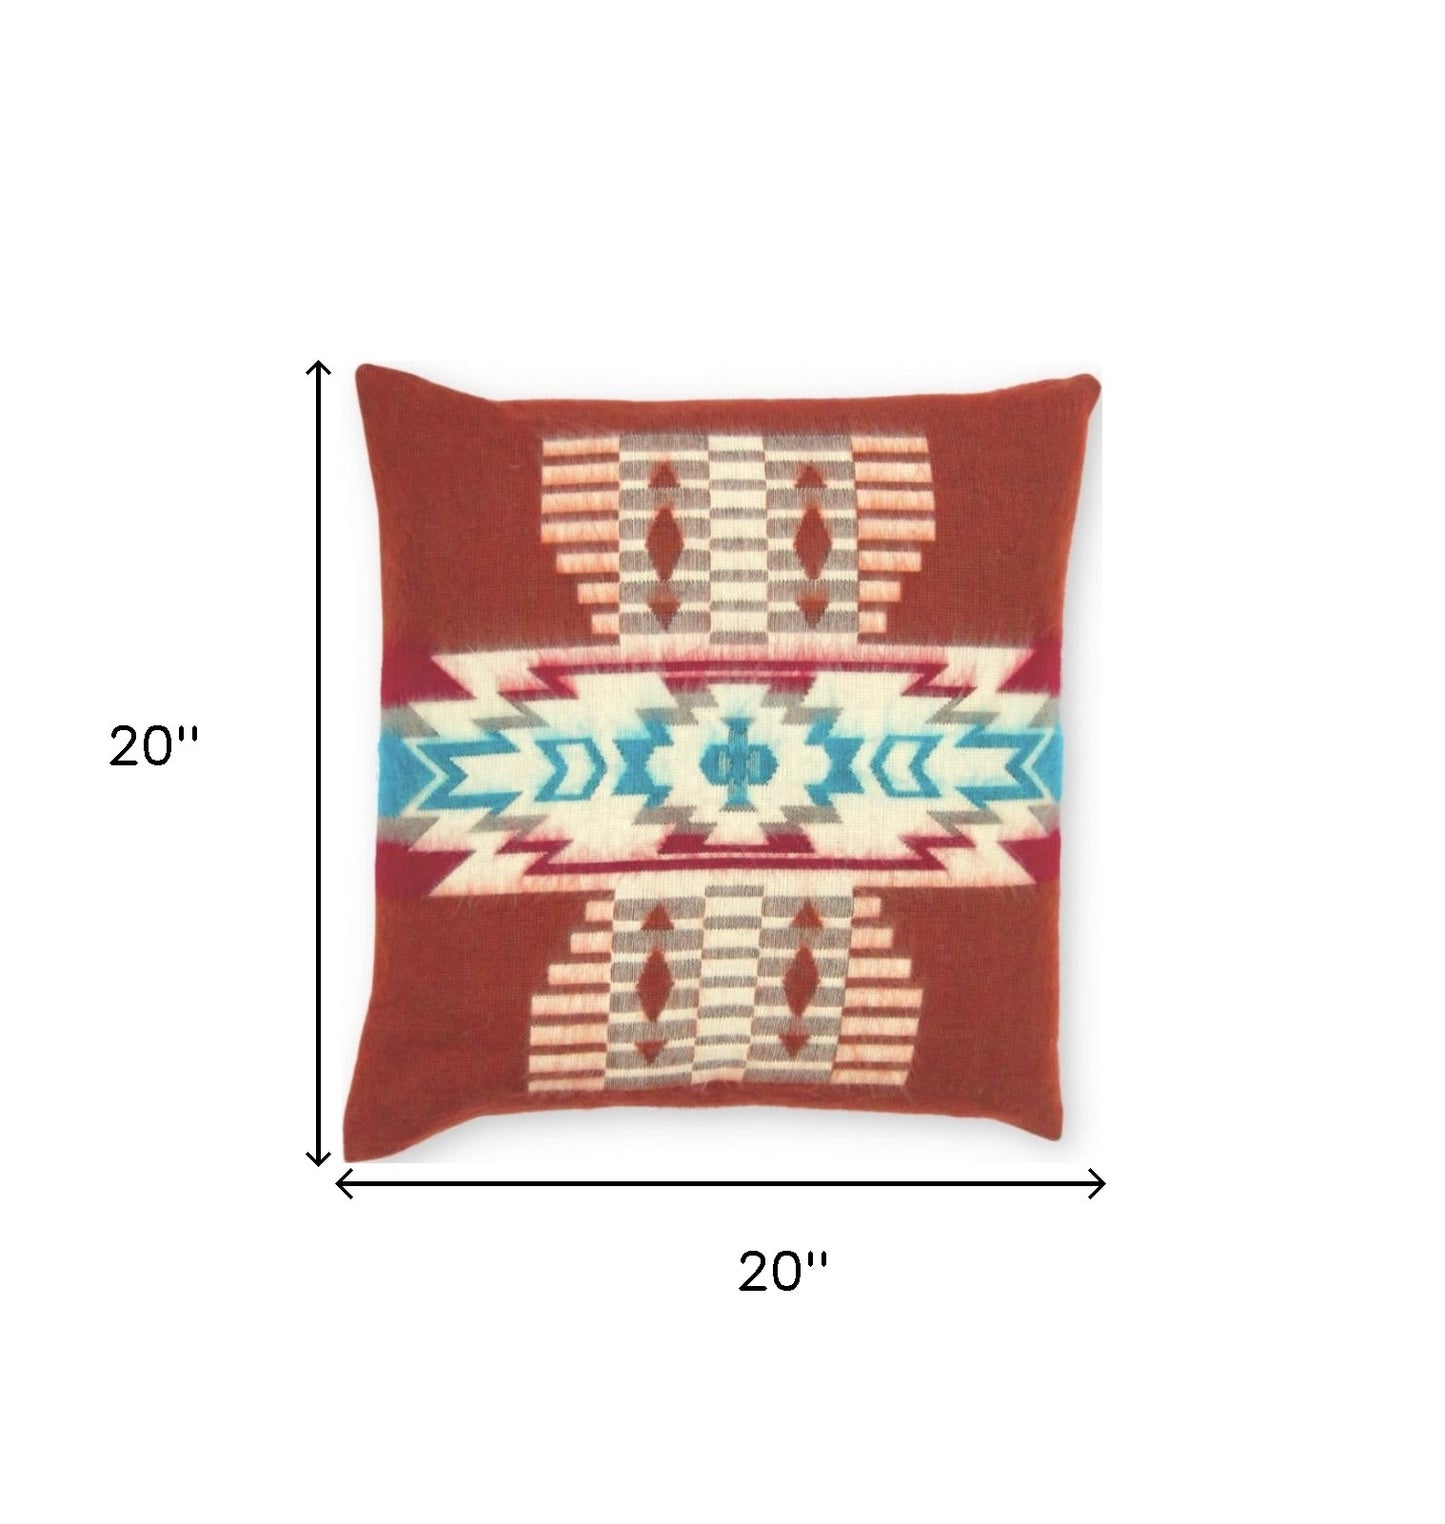 20" Brown and White Southwestern Acrylic Throw Pillow Cover